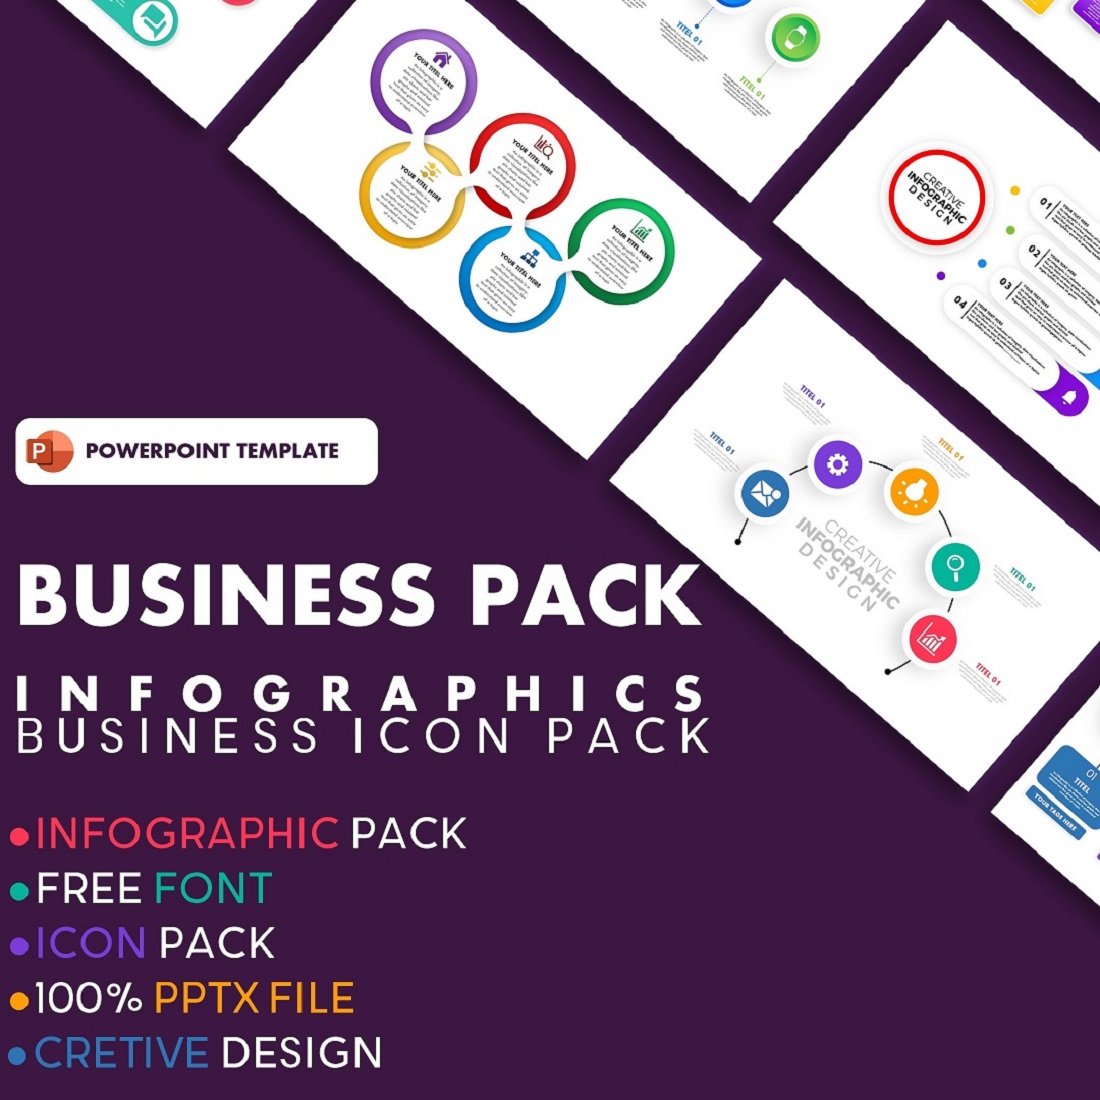 Business infographic pack PowerPoint templates cover image.